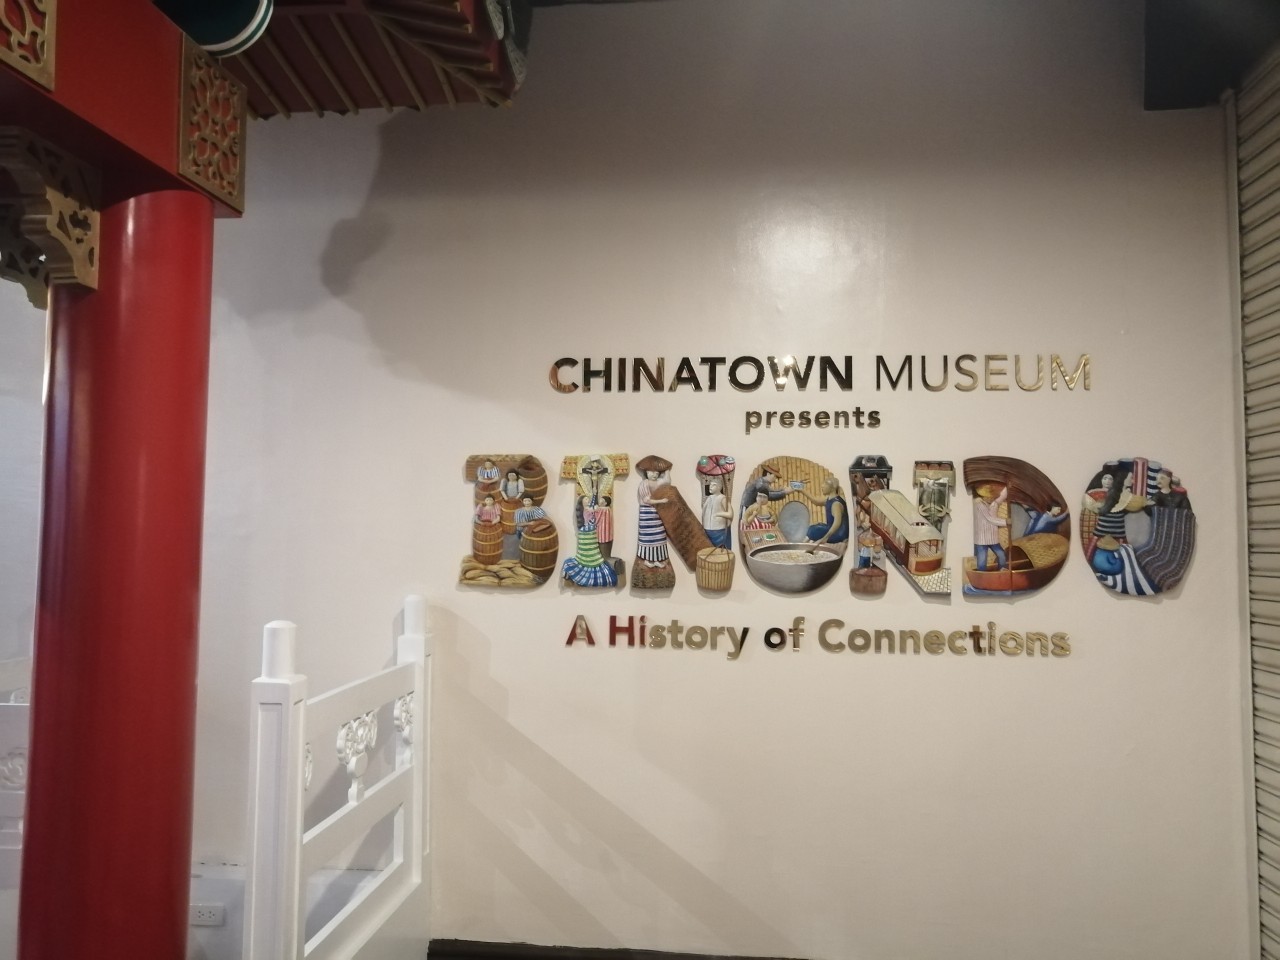 Chinatown Museum Entrance